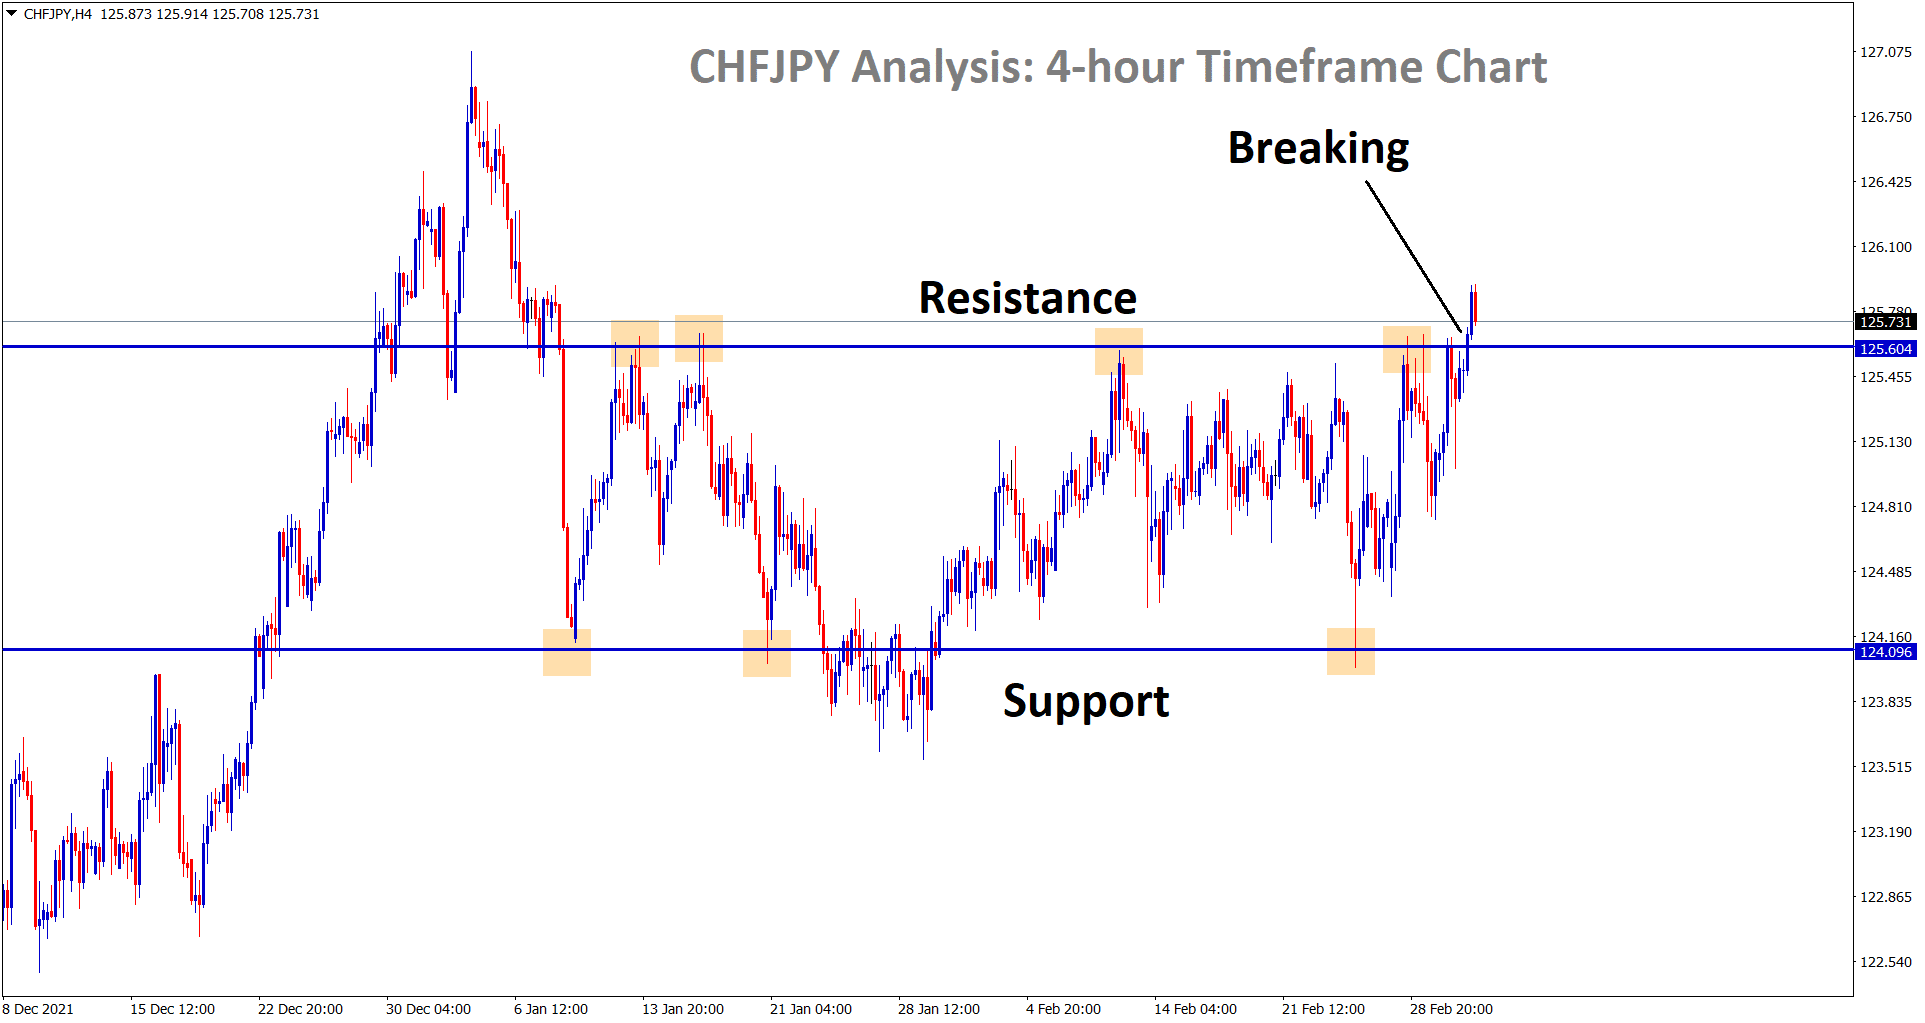 CHFJPY is breaking the resistance area in the 4 hour timeframe chart